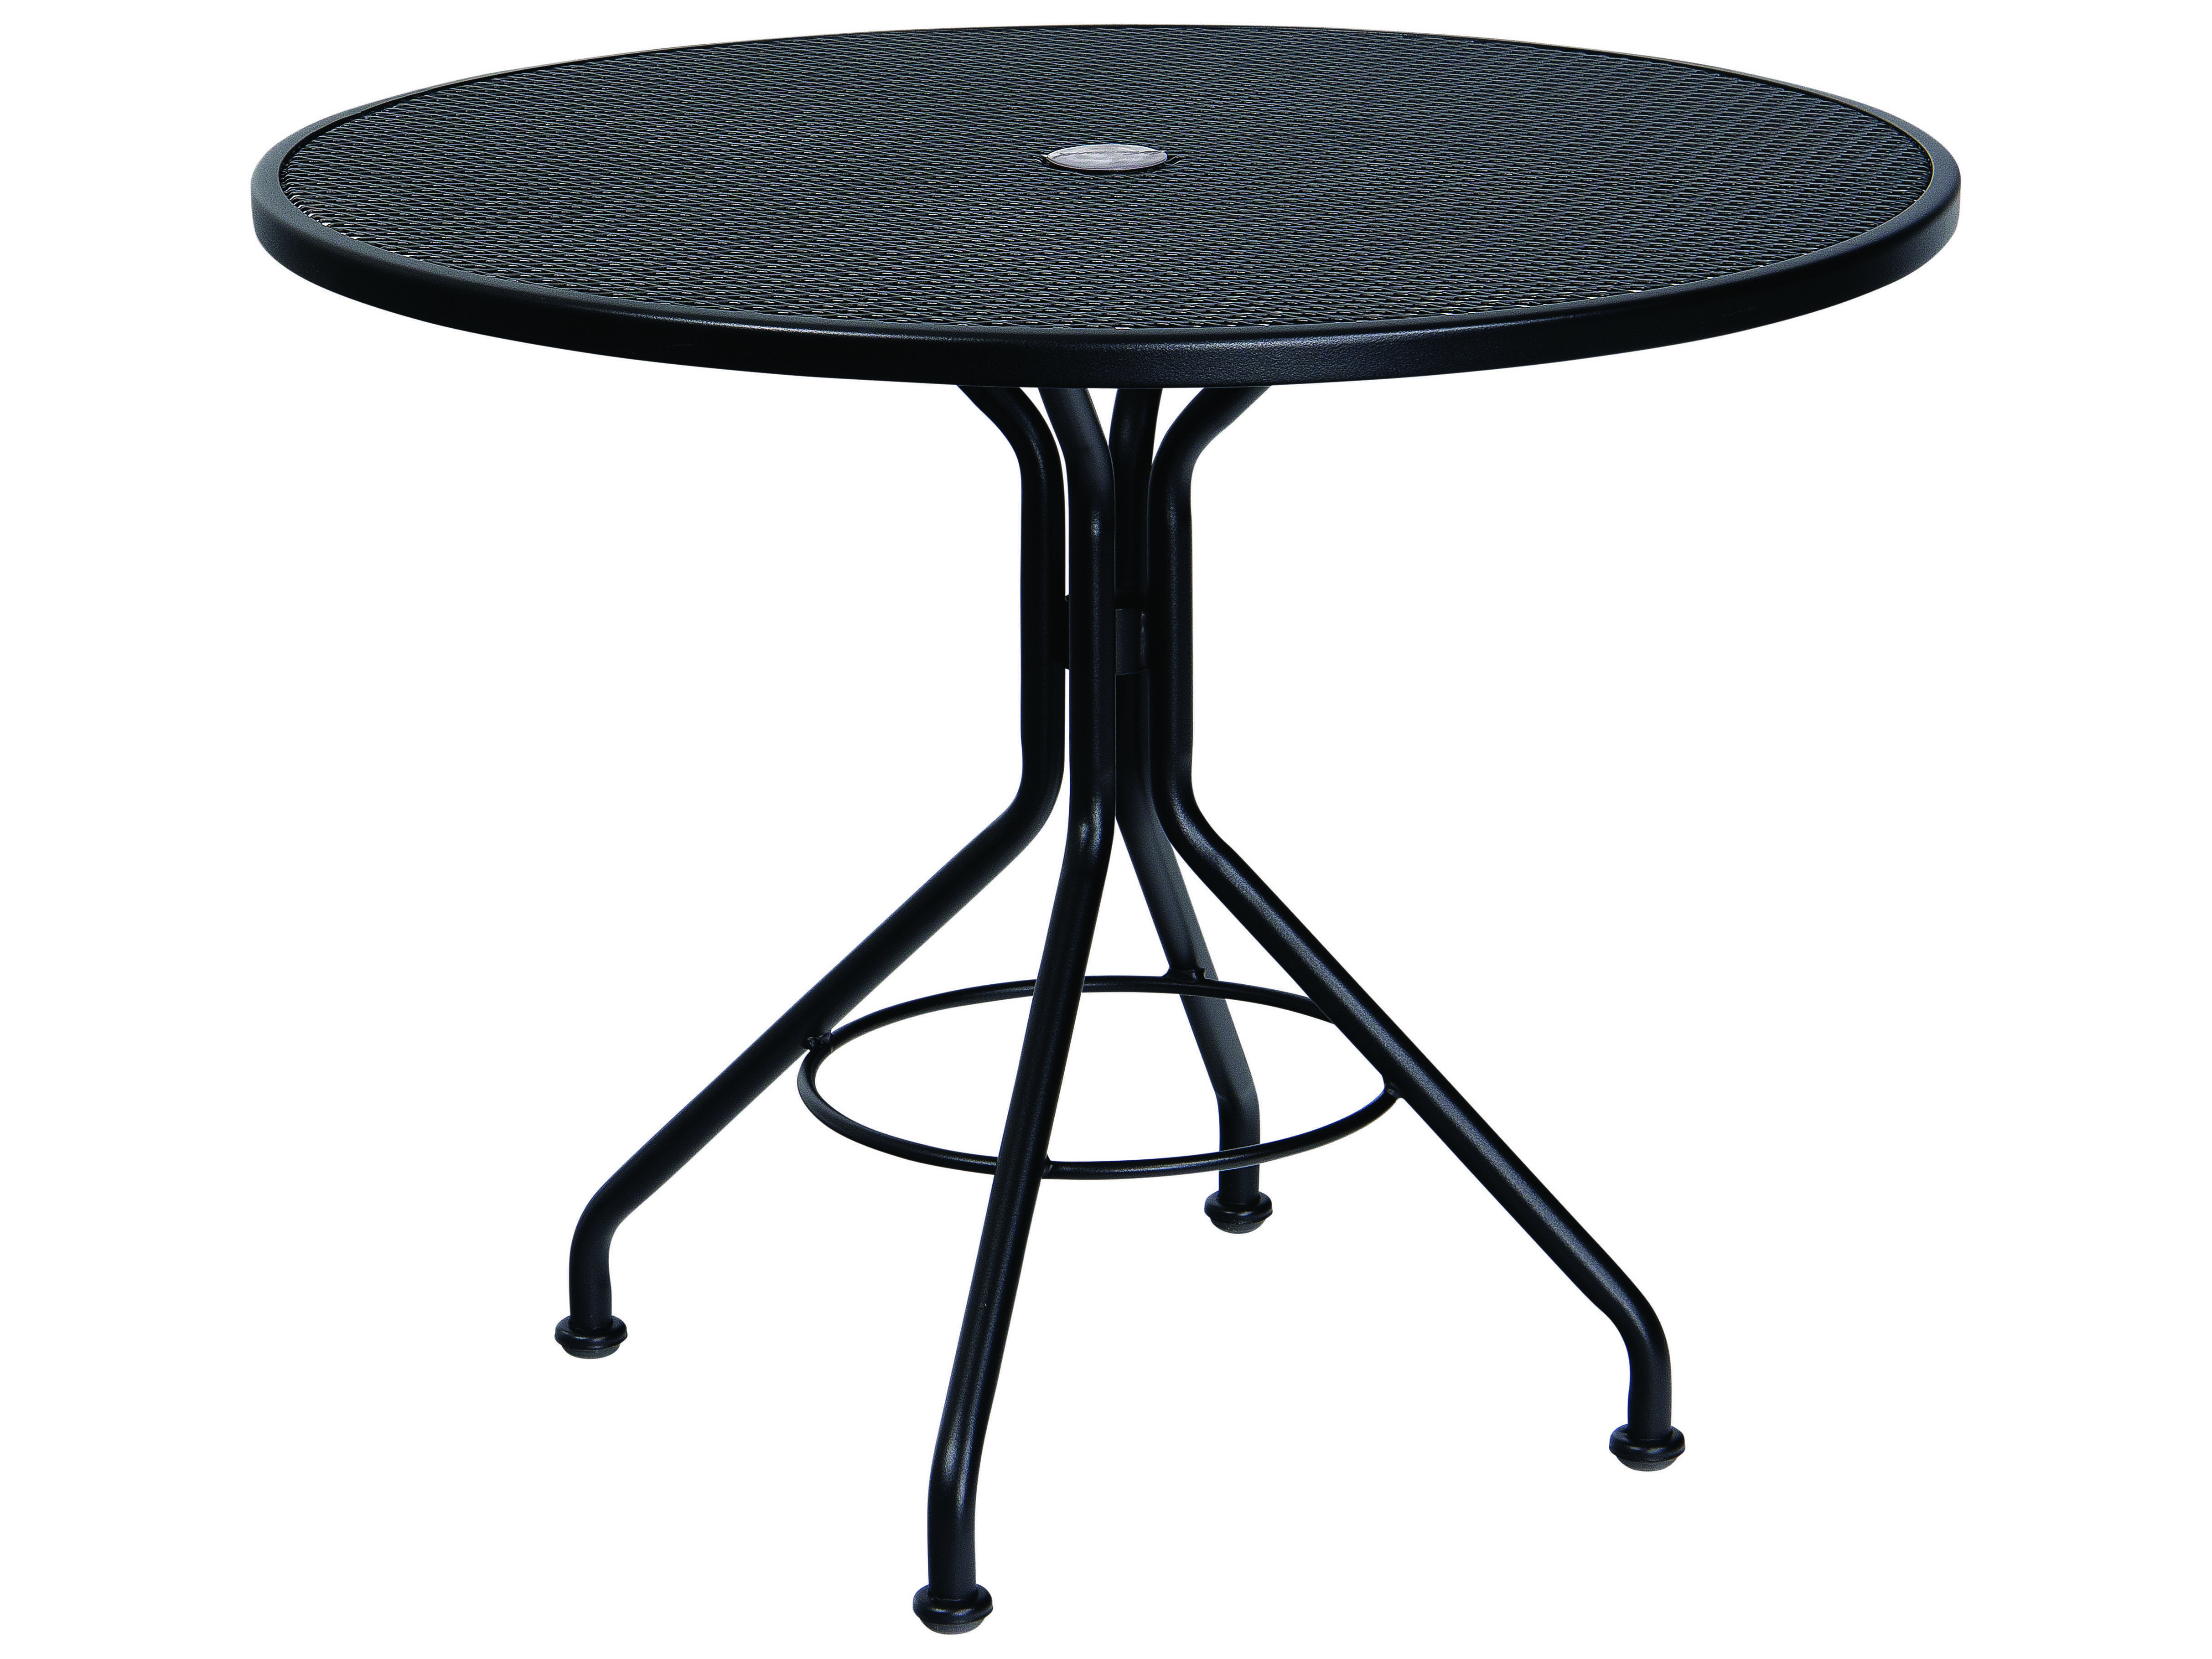 Woodard Wrought Iron Mesh 36 Wide, Round Bistro Table With Umbrella Hole